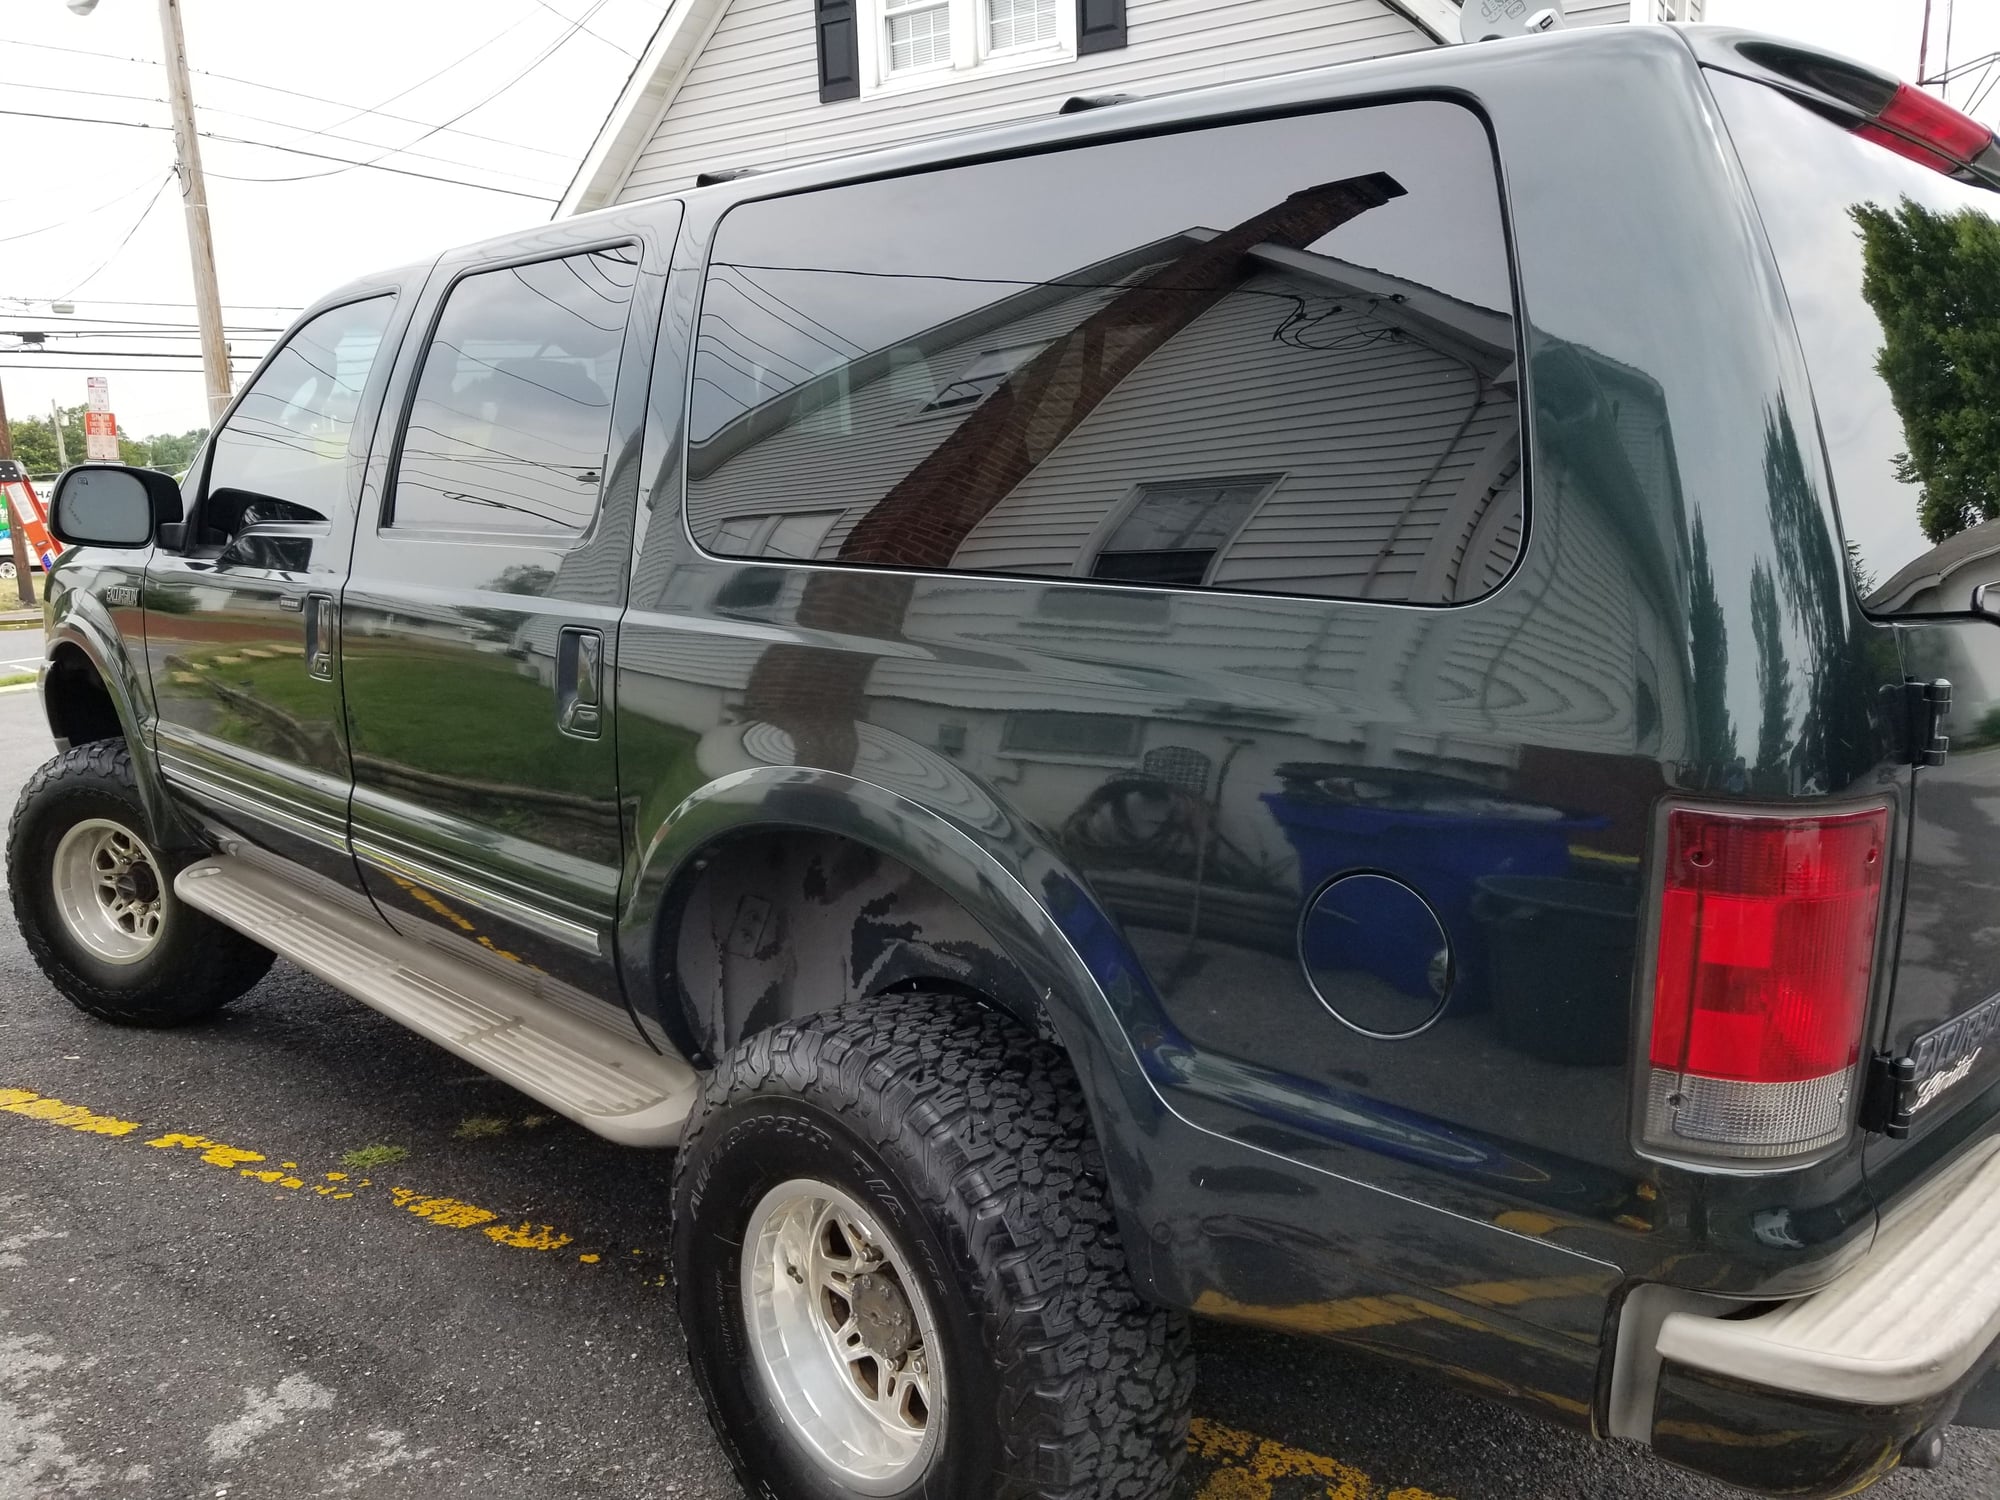 2003 Ford Excursion - 2003 Excursion Limited 4x4 V10 - Used - VIN 1FMNU43S93EB56118 - 207,000 Miles - 10 cyl - 4WD - Automatic - SUV - Other - Frederick, MD 21701, United States